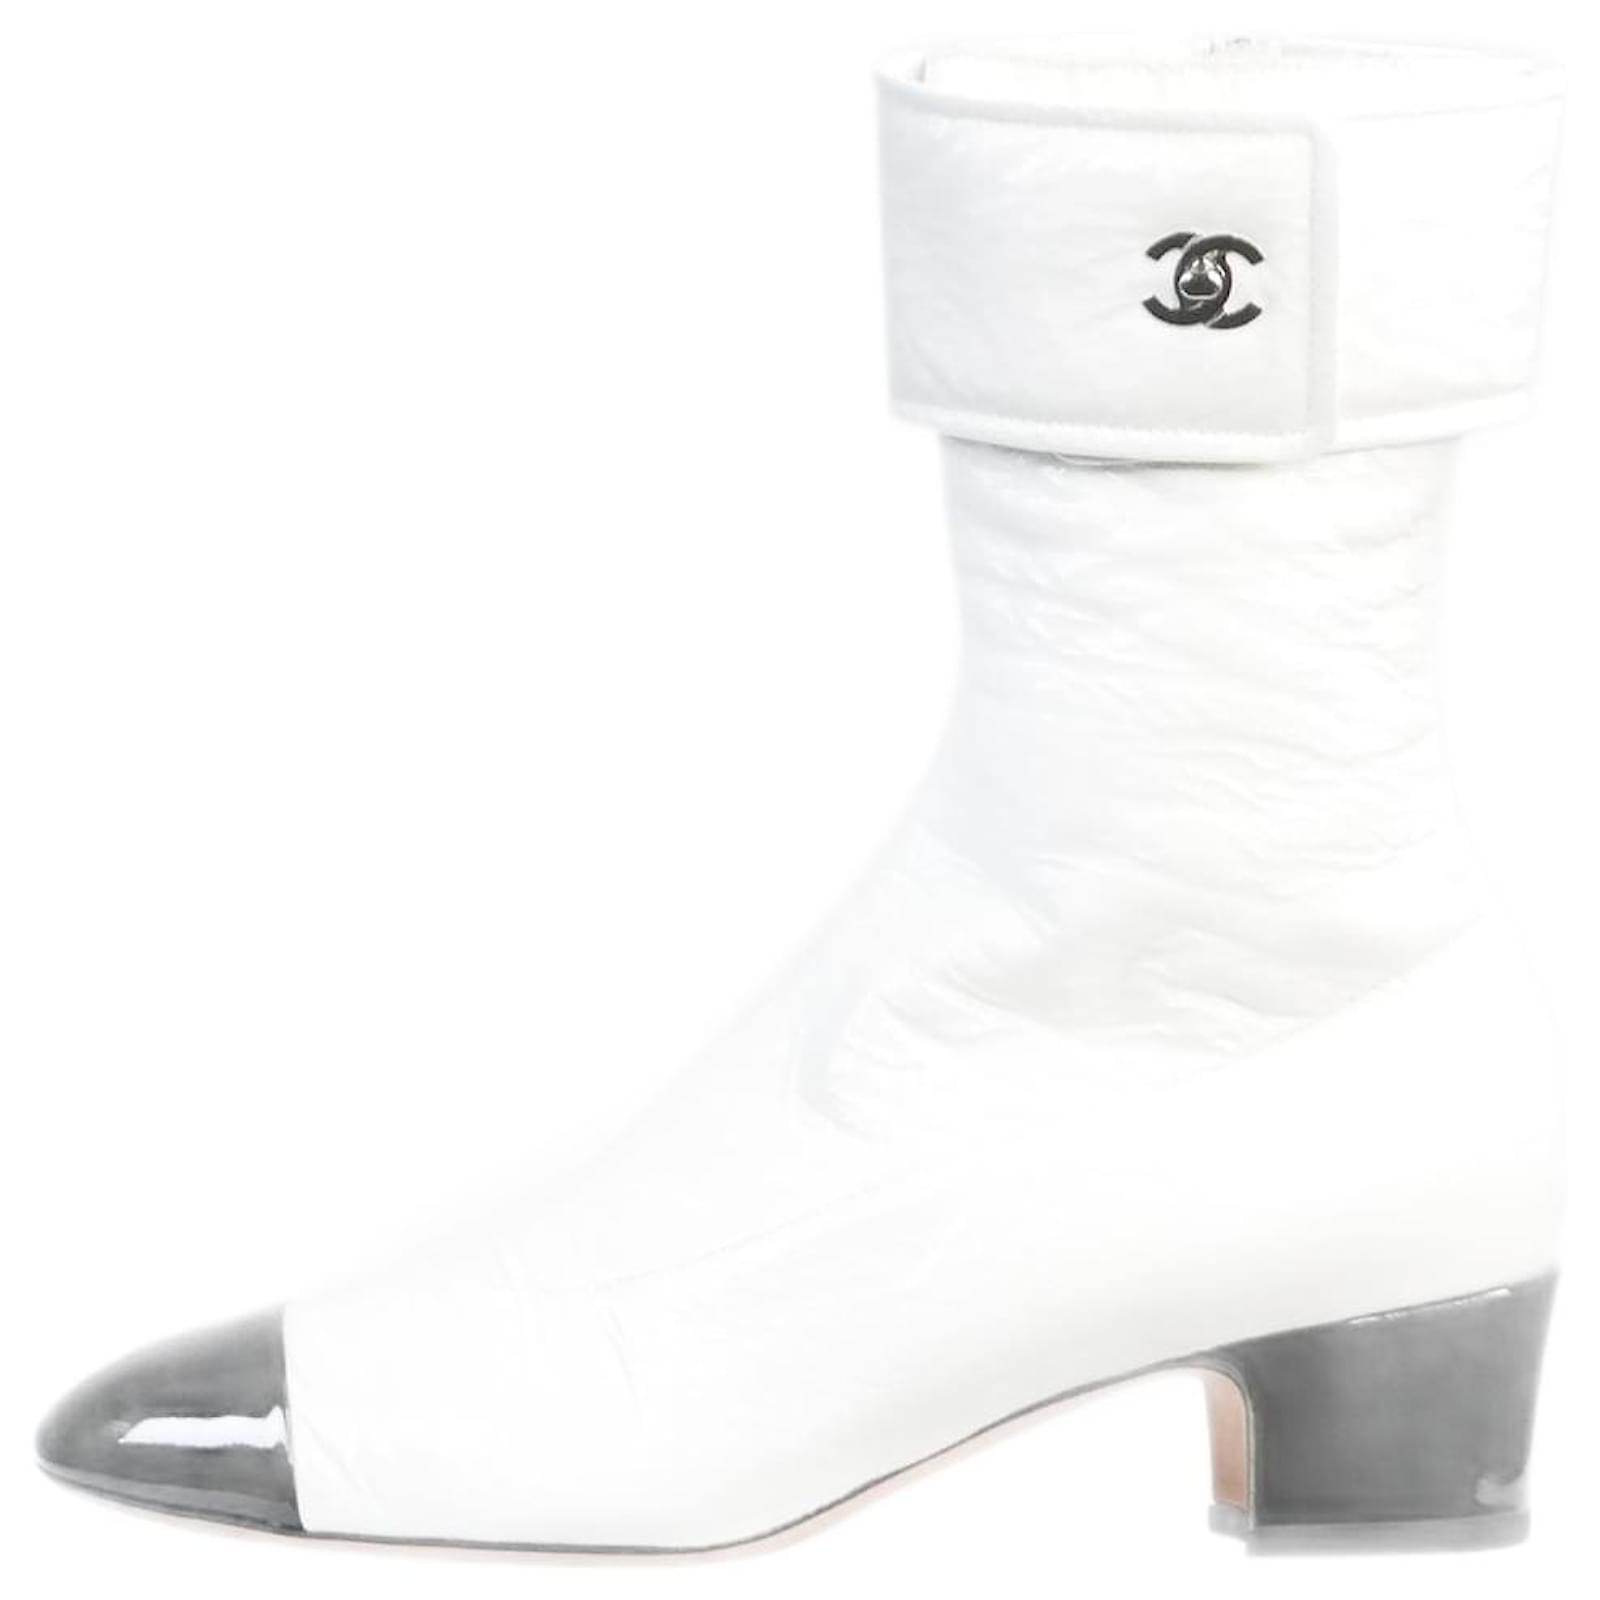 Ankle Boots Chanel White Patent Leather Crinkled Ankle Boots - Size EU 38.5